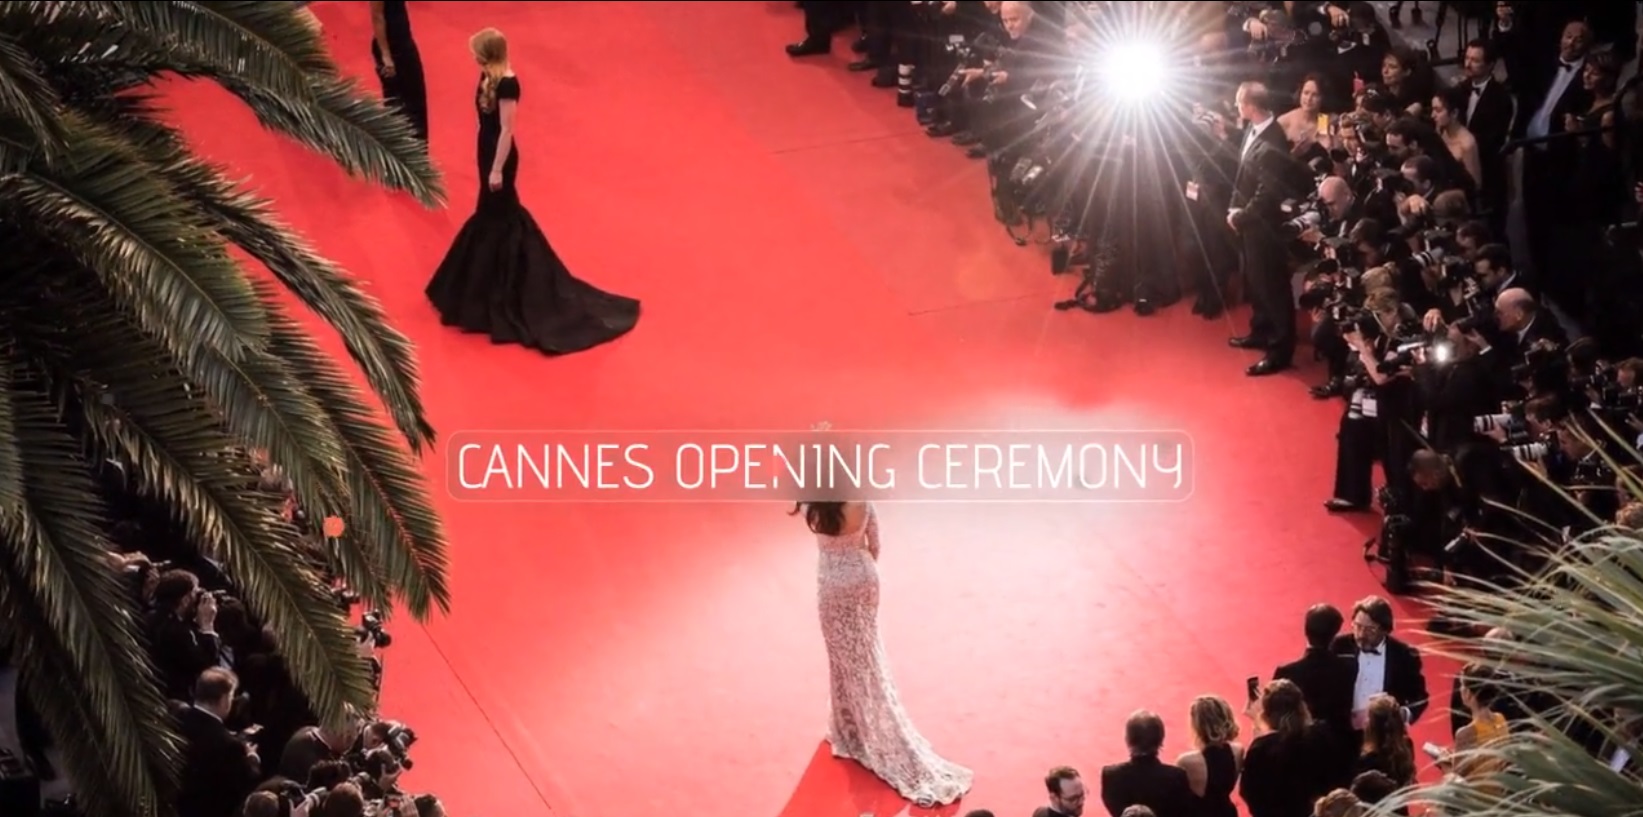 attend cannes film festival openeing ceremony vip tickets